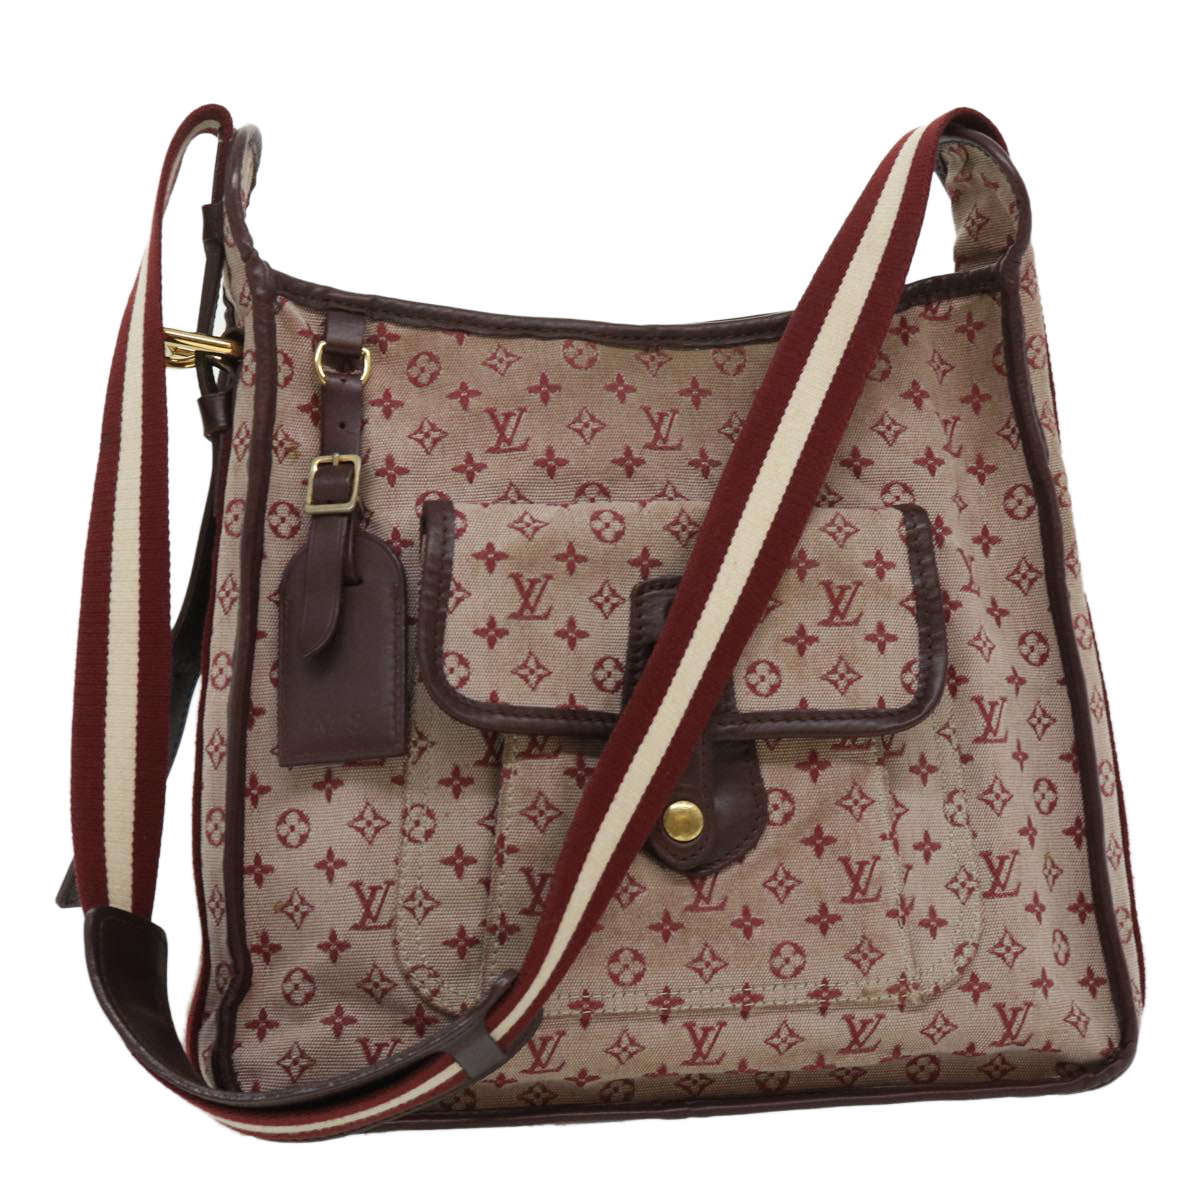 LOUIS VUITTON Monogram Mini Besace Mary Kate Shoulder Bag Red M92321 Auth bs2182